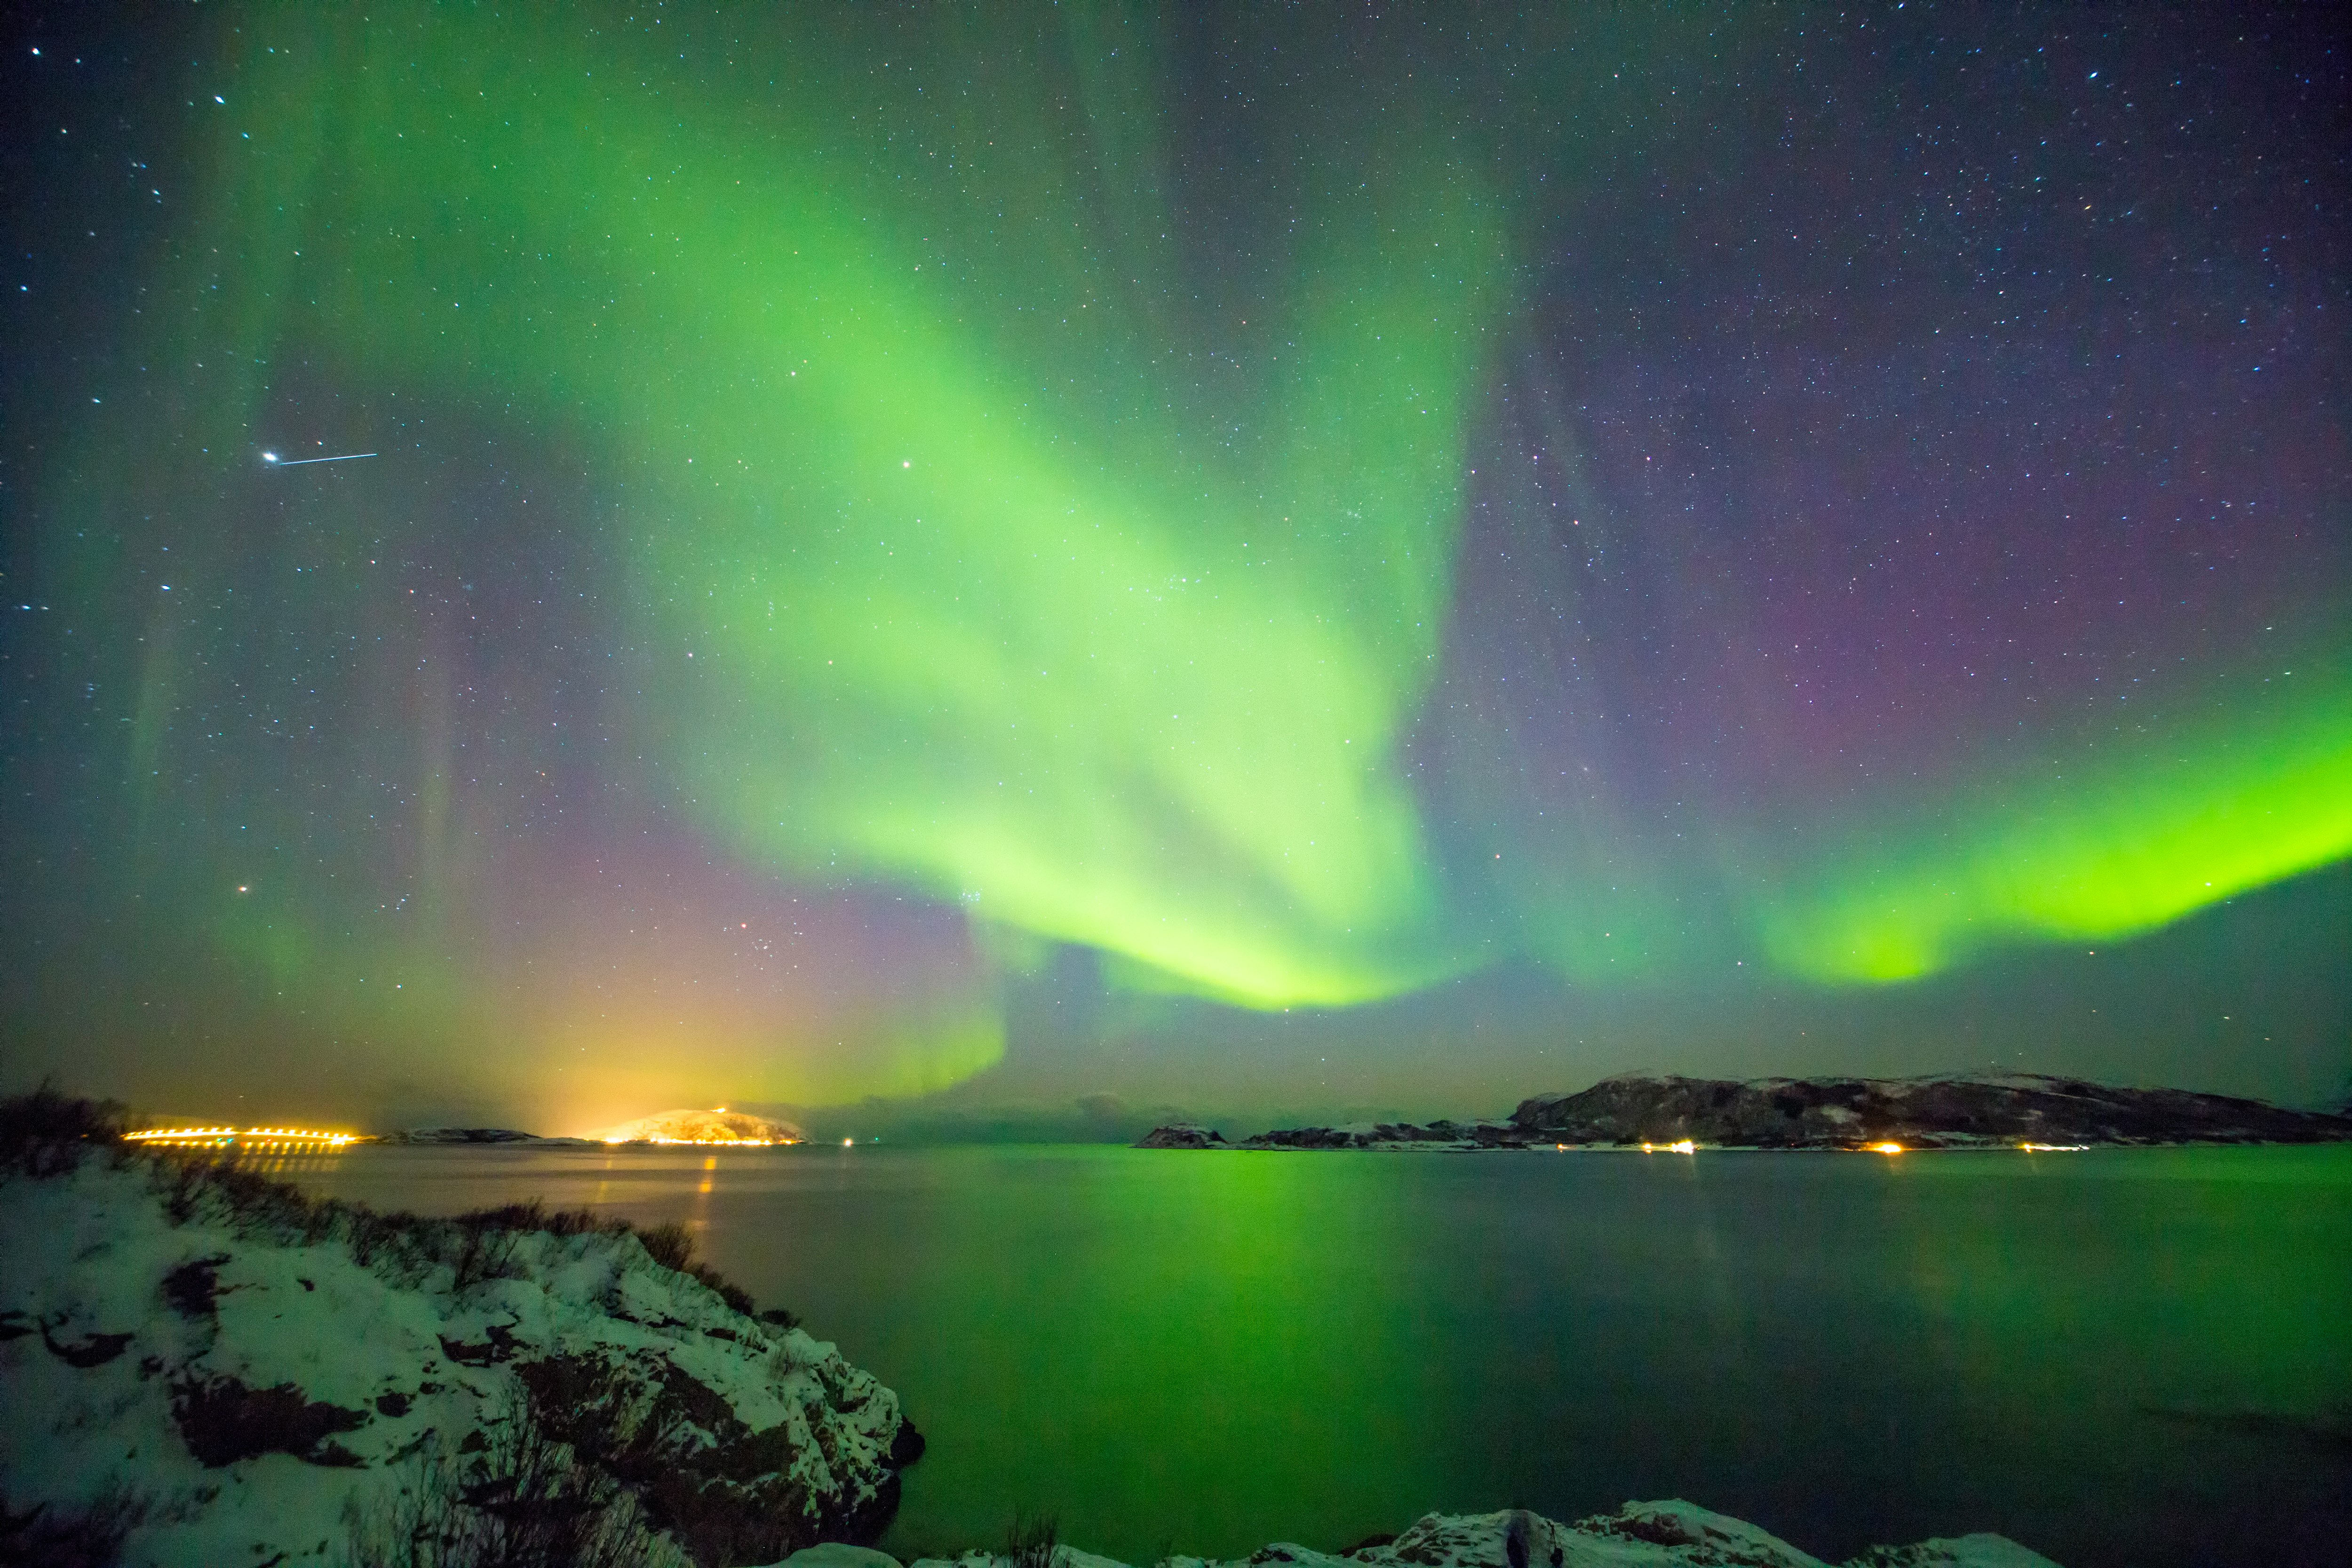 Witnessing the magical Northen Lights as they move majestically across the night sky over Tromso, Norway definitely is one of the must see sights in a lifetime. It’s a life changing transformative experience.